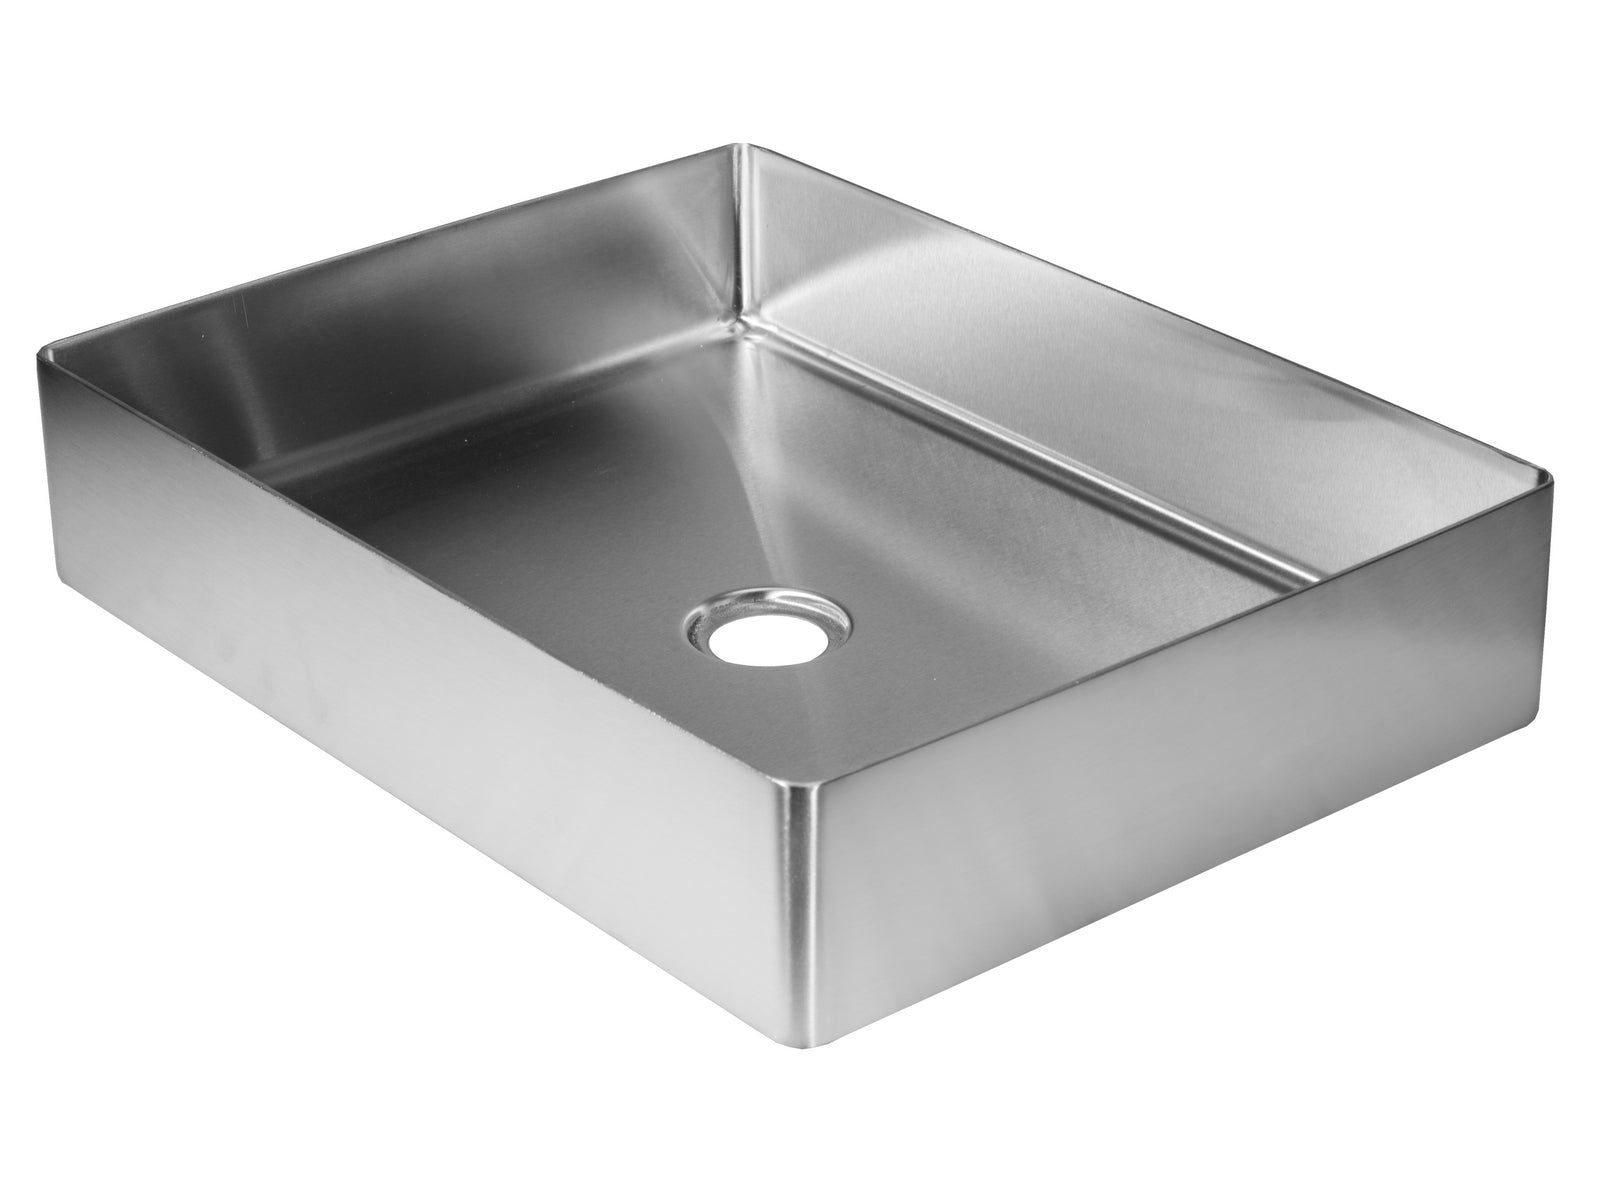 Rectangular 19" x 14 1/2" Stainless Steel Bathroom Vessel Sink with Drain in Silver